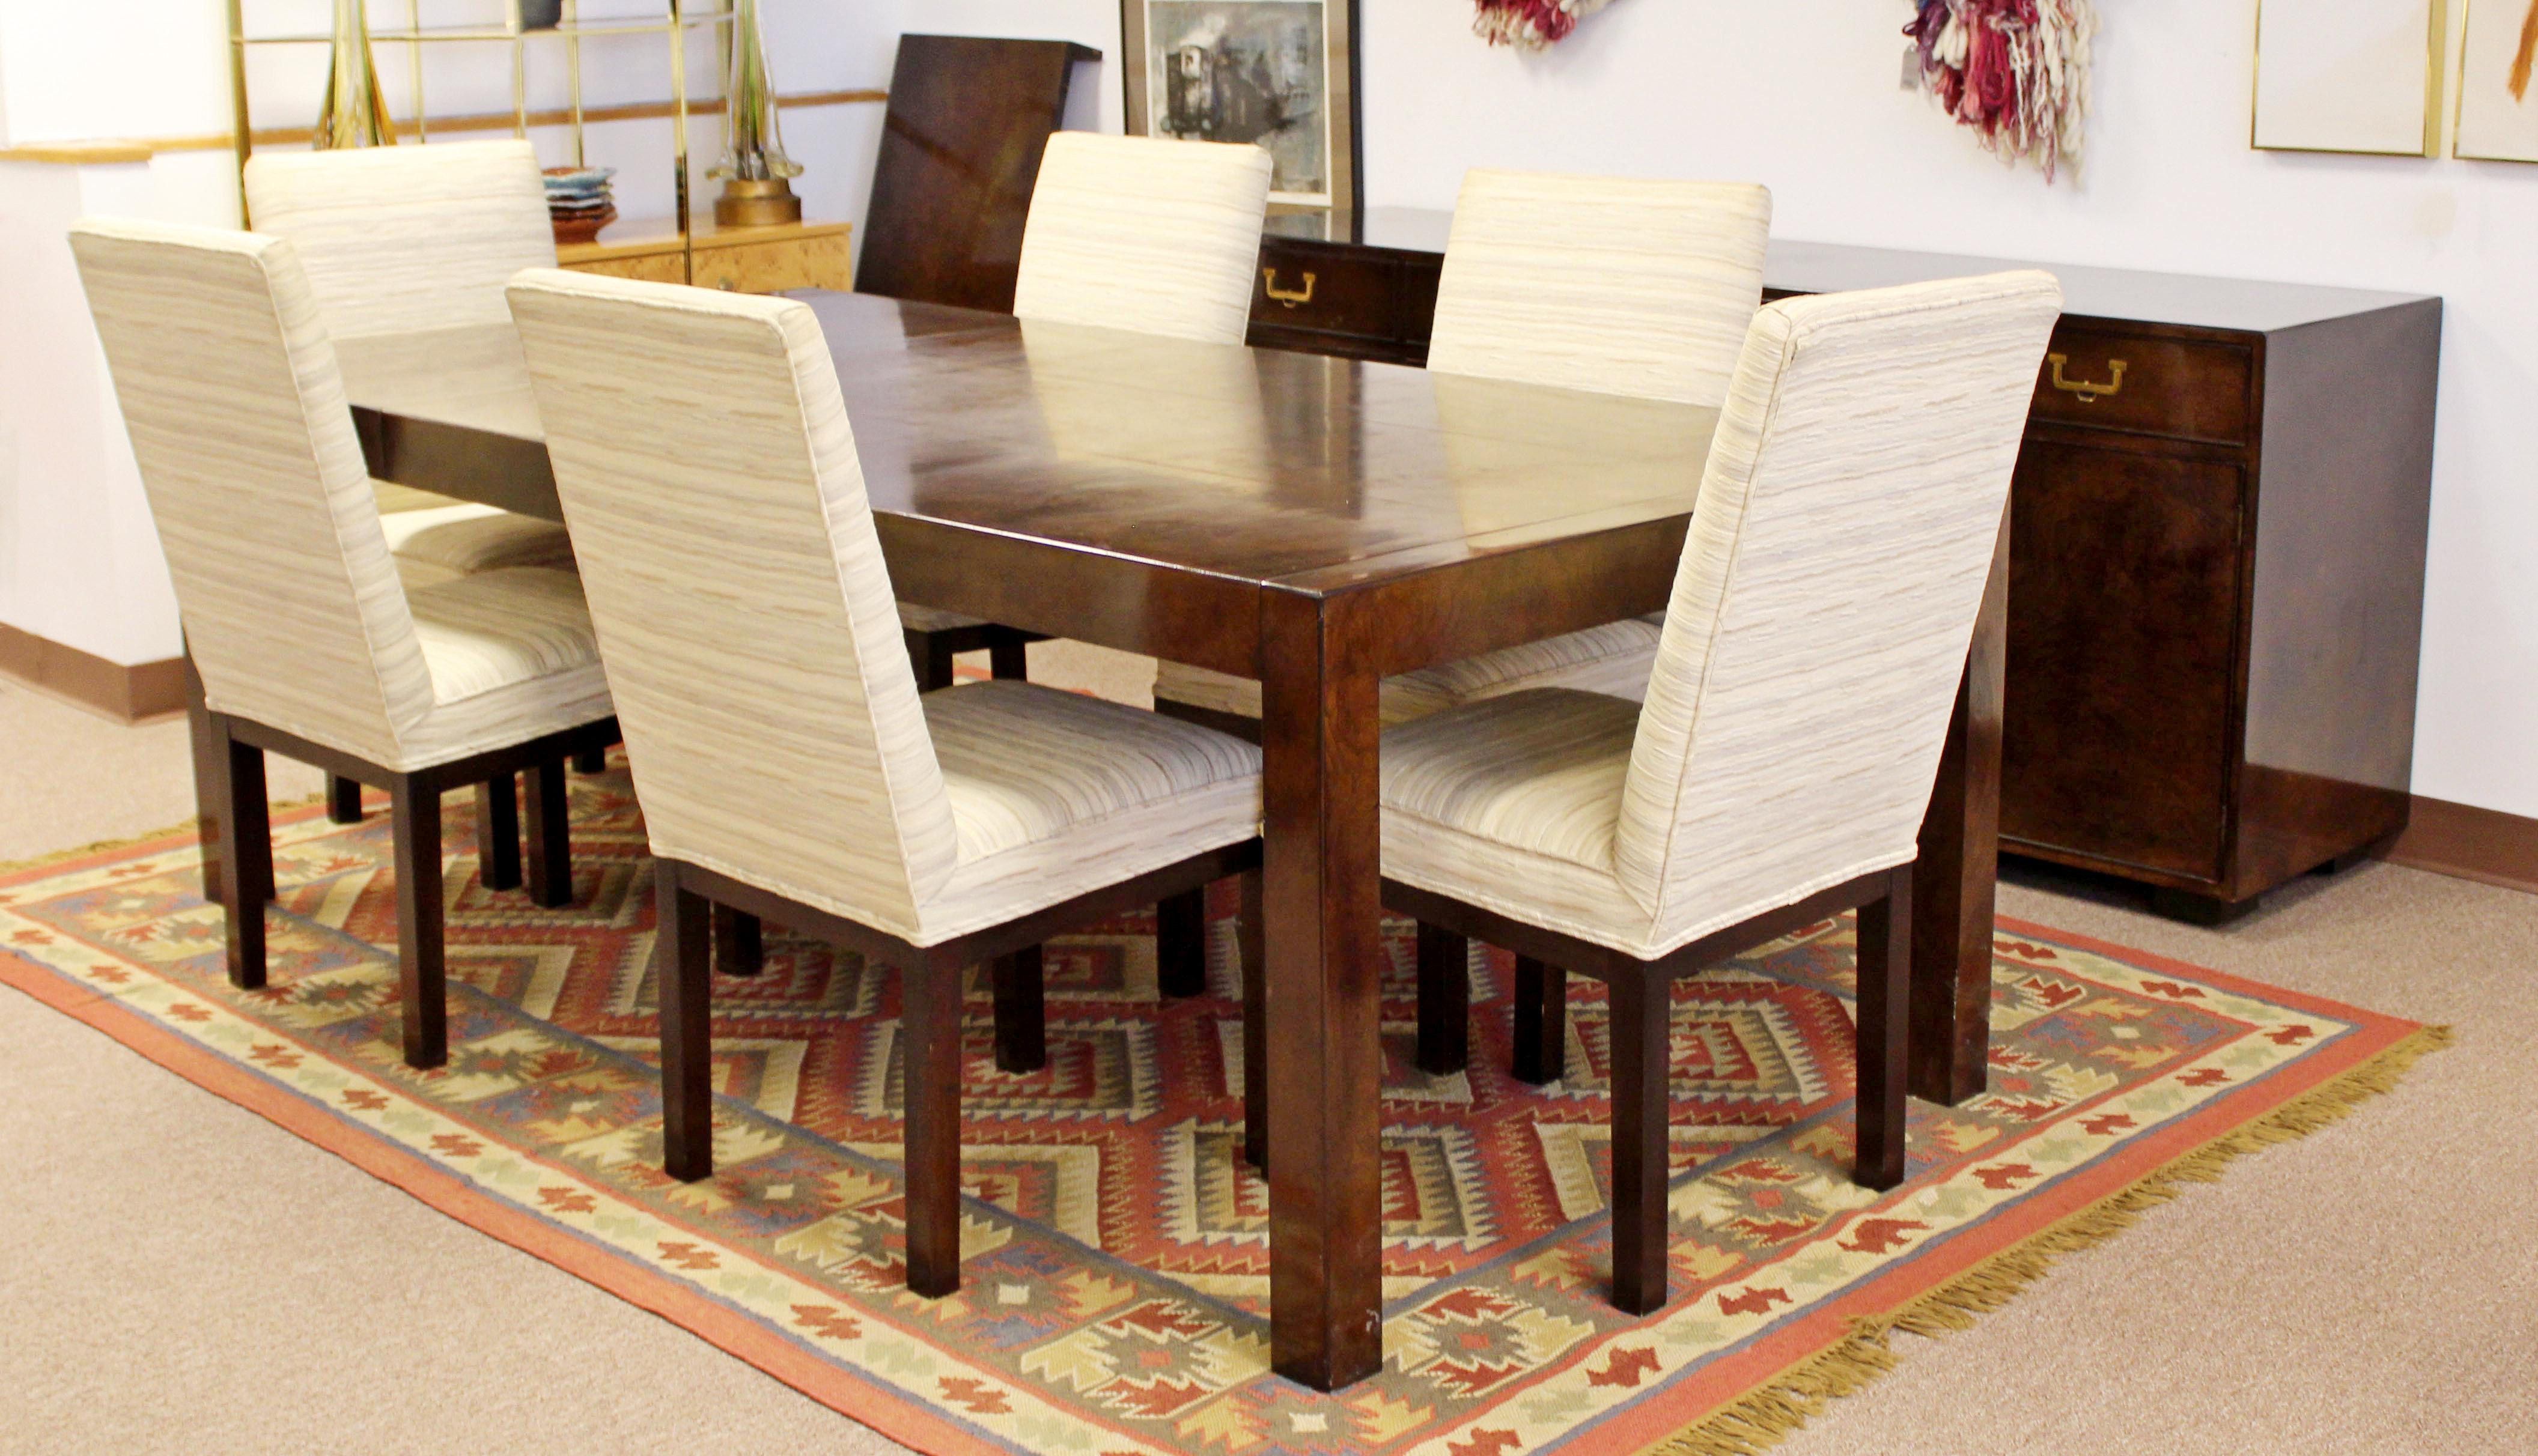 For your consideration is a maginificent dining room set, including a burl wood credenza, with brass pulls and two shelves and two drawers, a burl wood dining table with two leaves, and a set of six side chairs, by John Widdicomb, circa 1950s. In